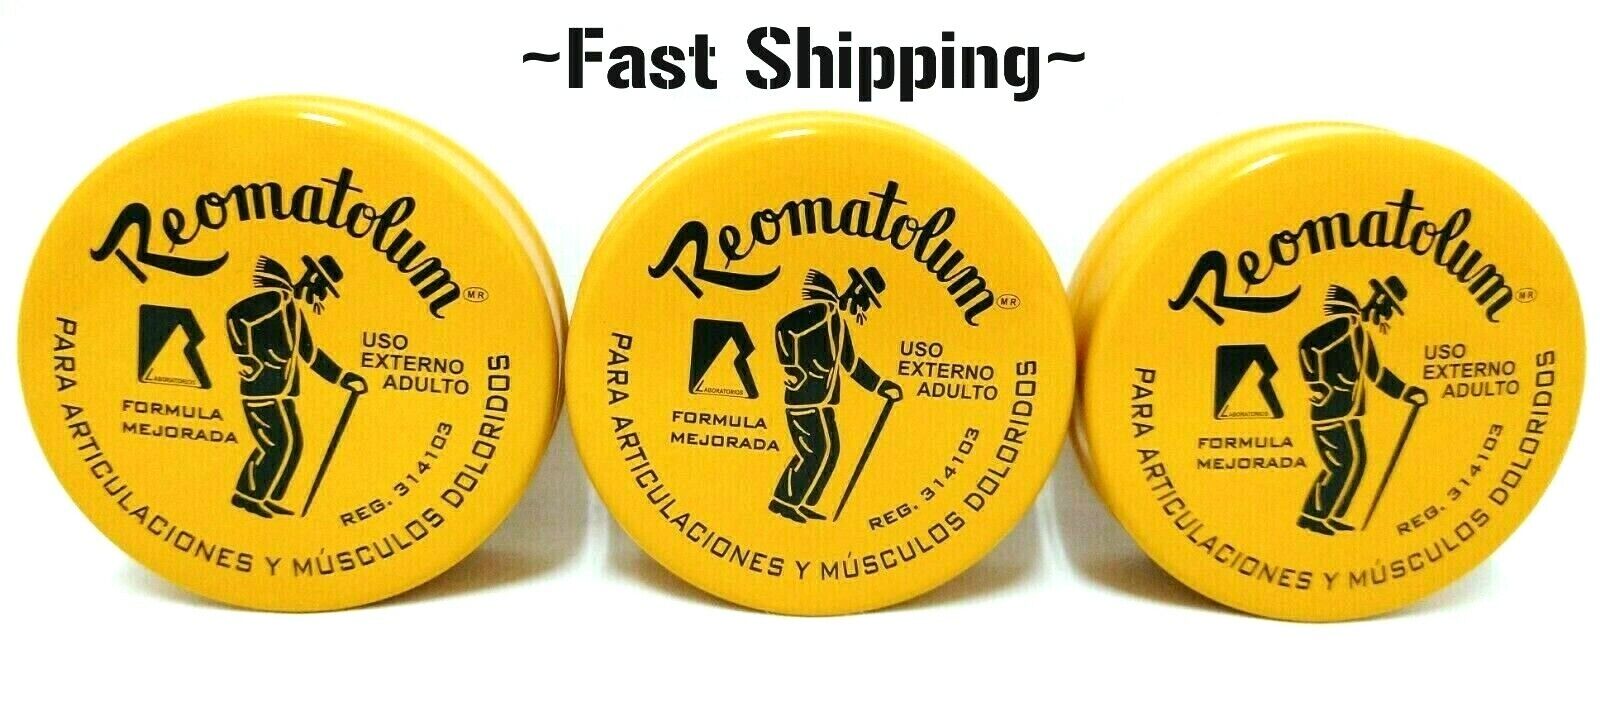 3 REOMATOLUM Pomada Articulaciones, Musculos Doloridos / Ointment Joins Muscles Unbranded 7 503002 045008